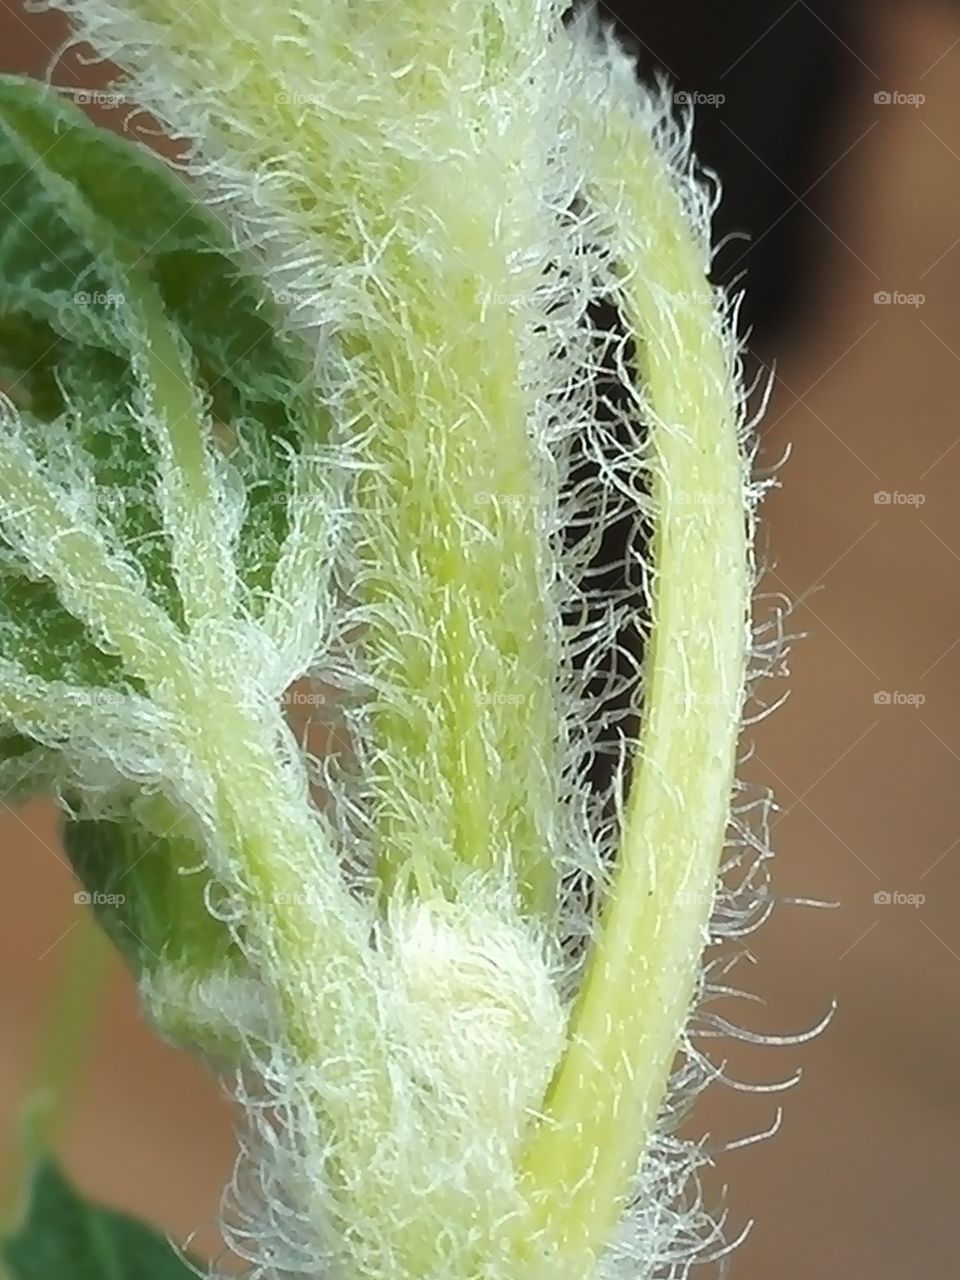 Hairy young bitter gourd stem